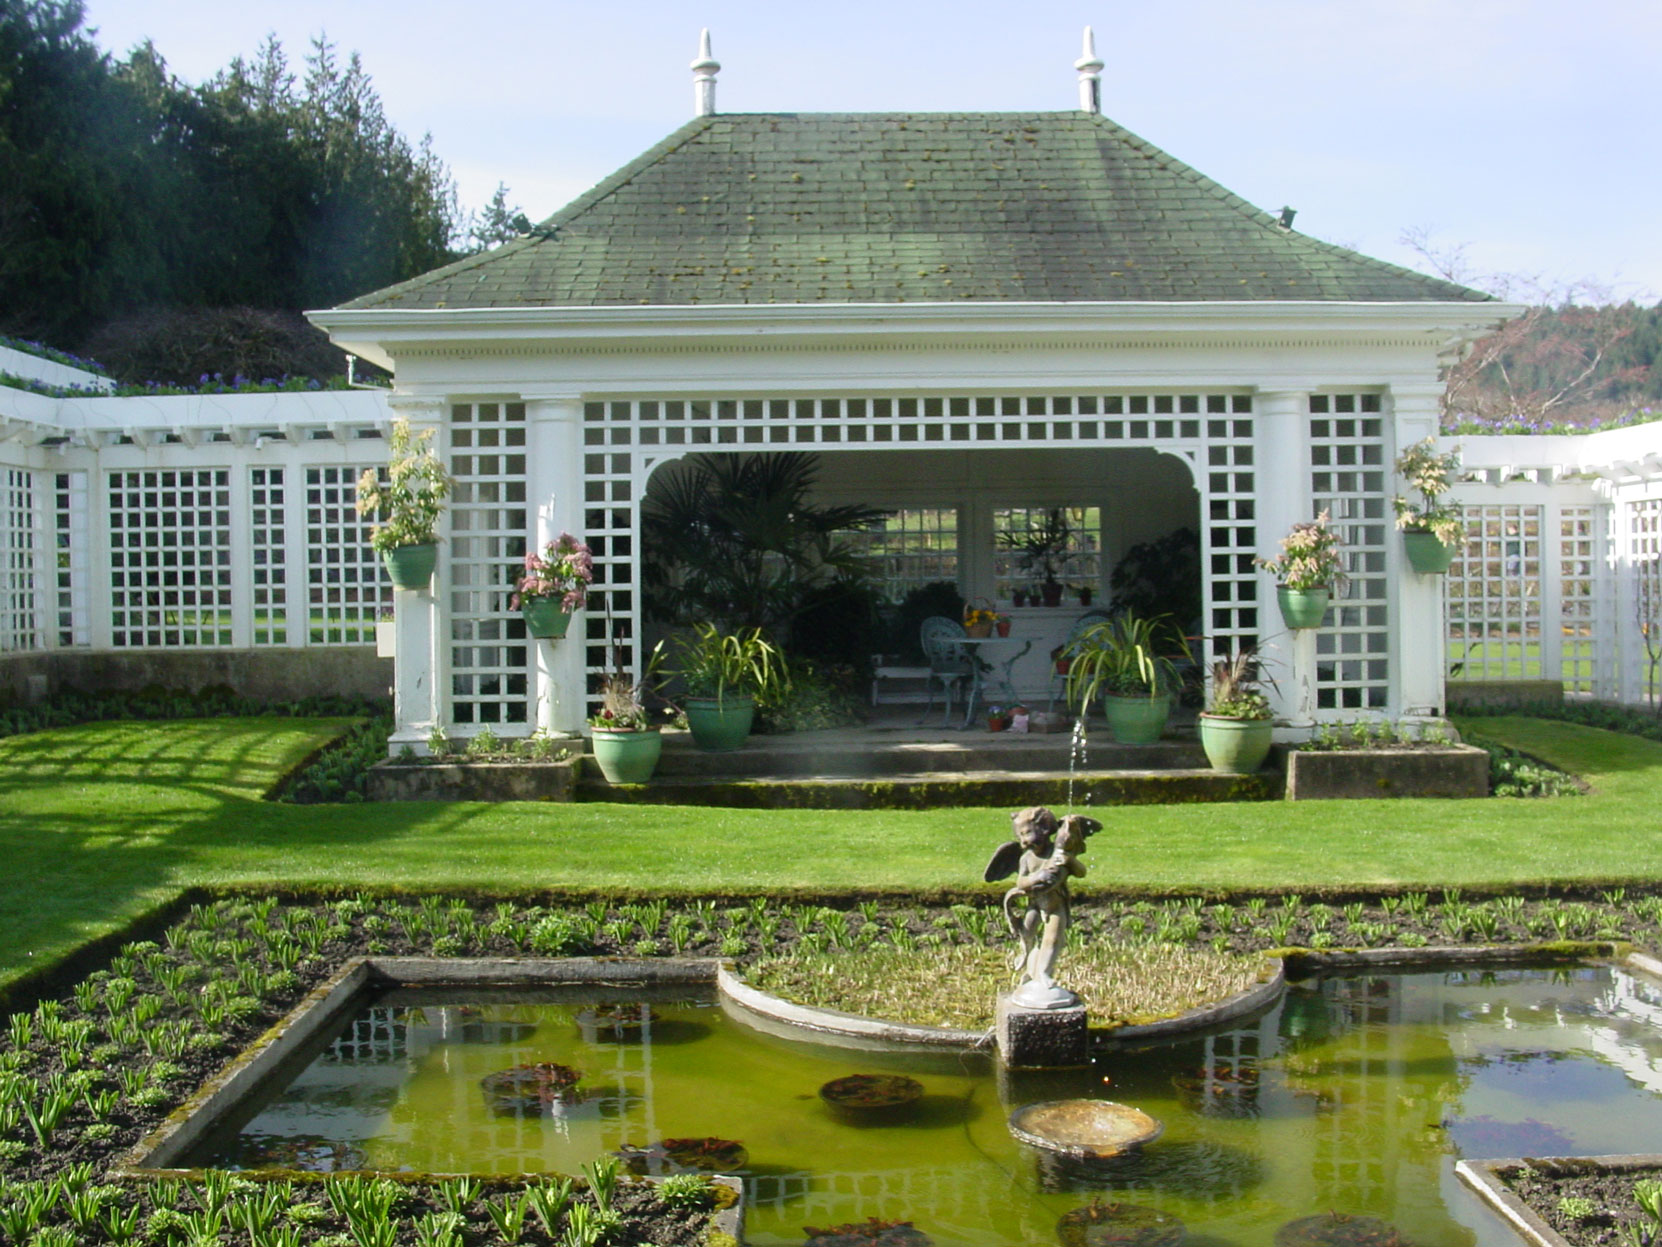 Jennie Butchart's Private Garden, designed and built in 1920-1921 by architect Samuel Maclure. This photo was taken from the Sun Room in March (photo by Author)